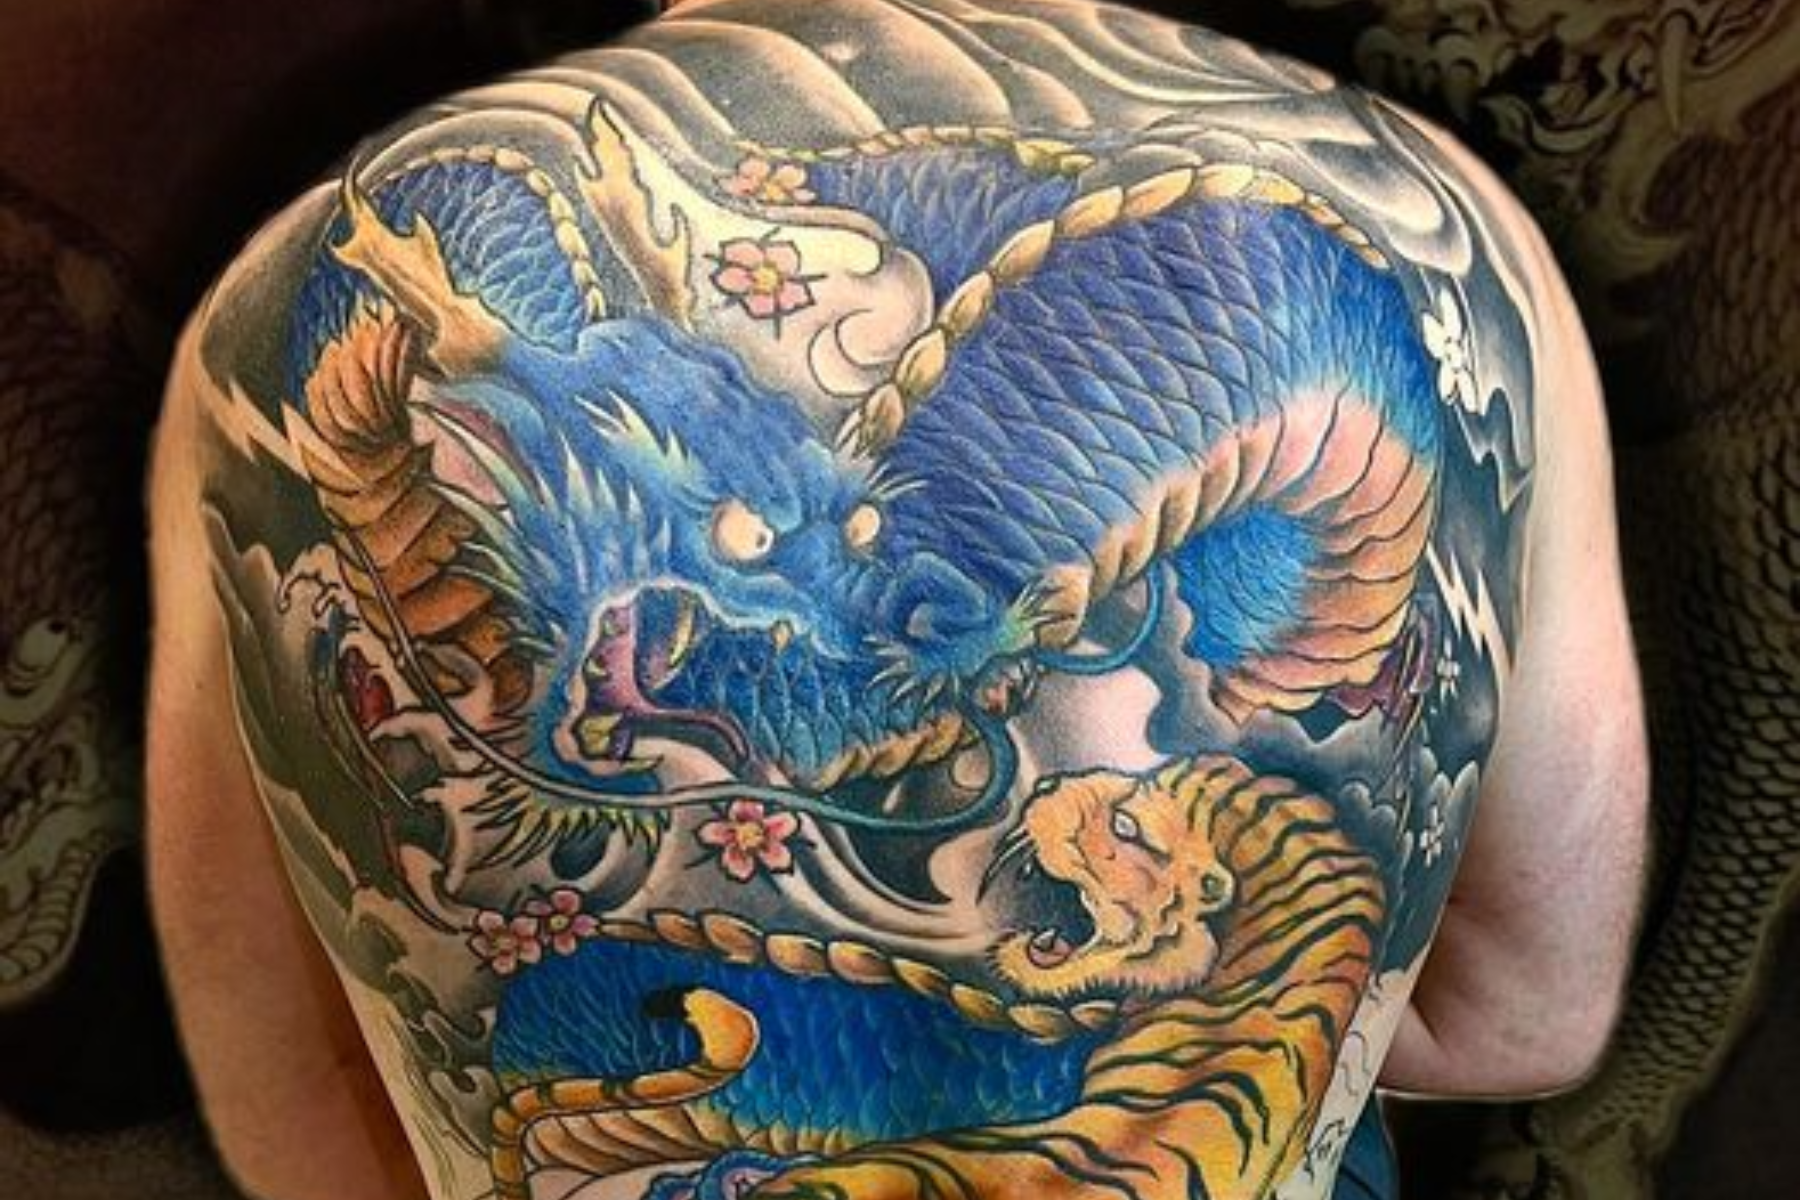 A man is wearing a full-back Japanese tattoo